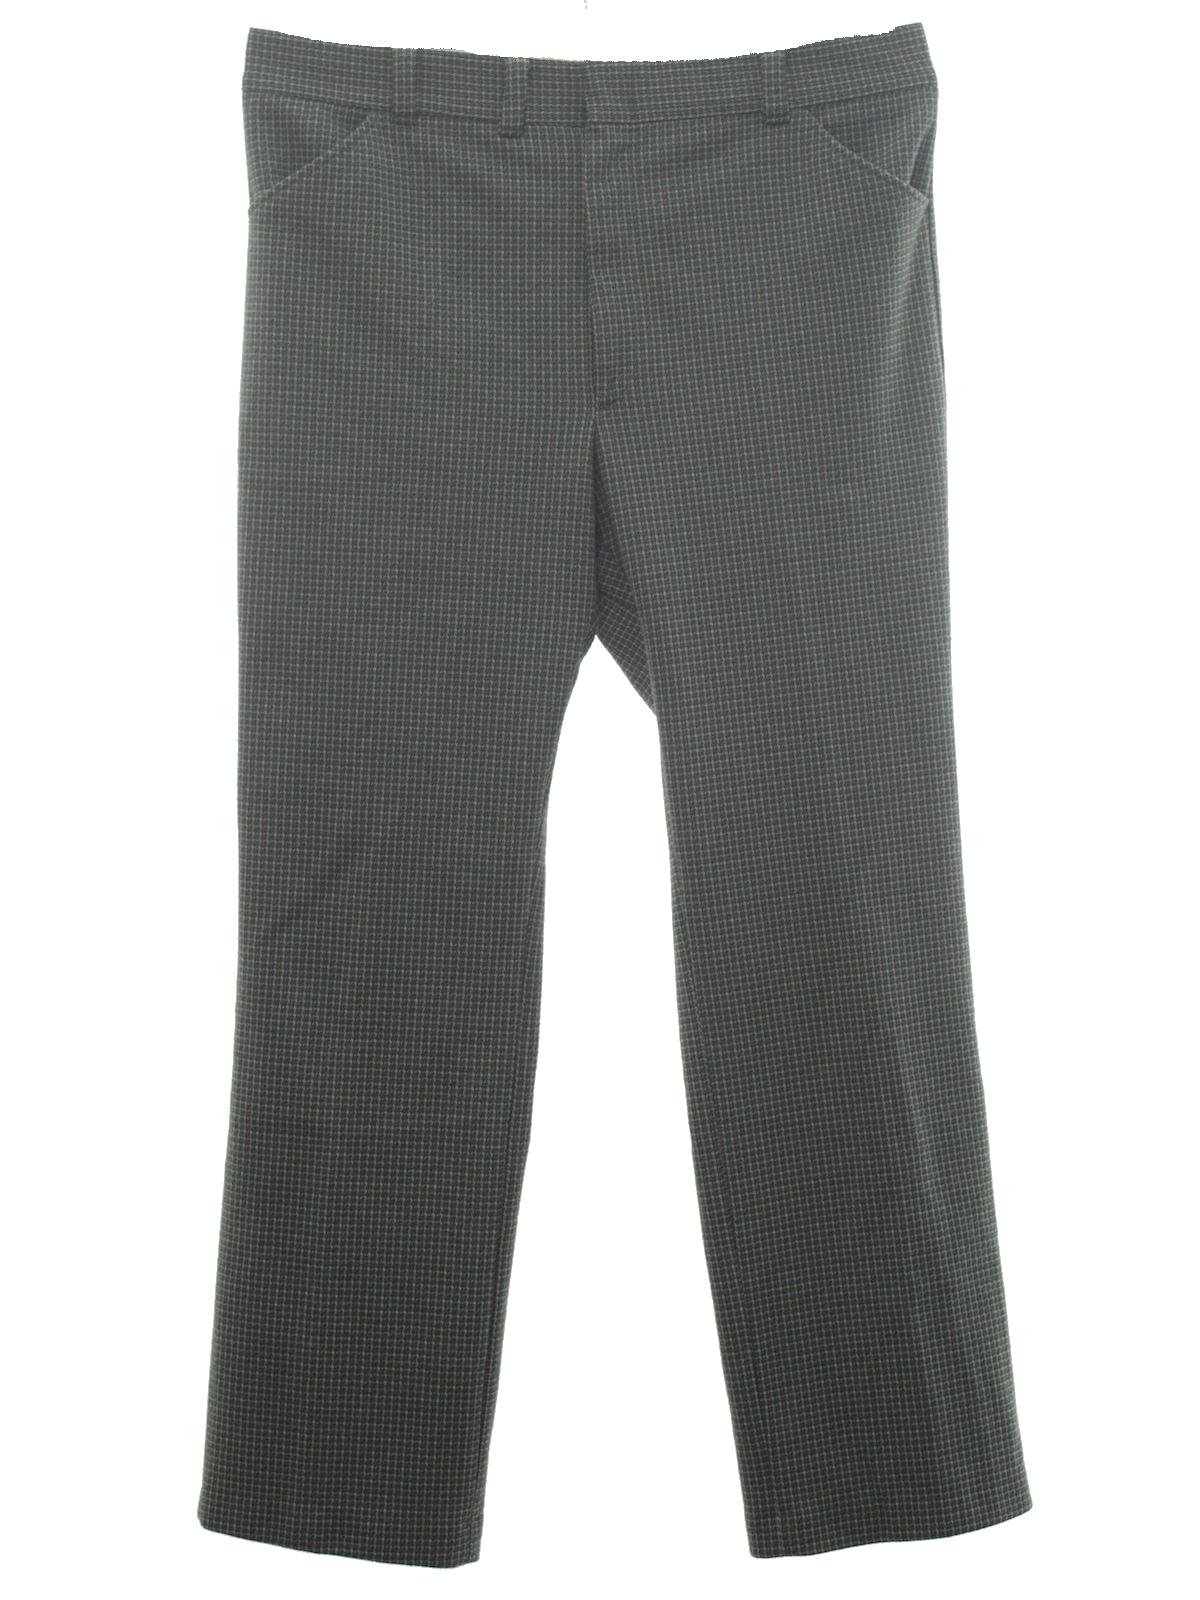 Haband 70's Vintage Pants: 70s -Haband- Mens beige, grey, navy blue and ...